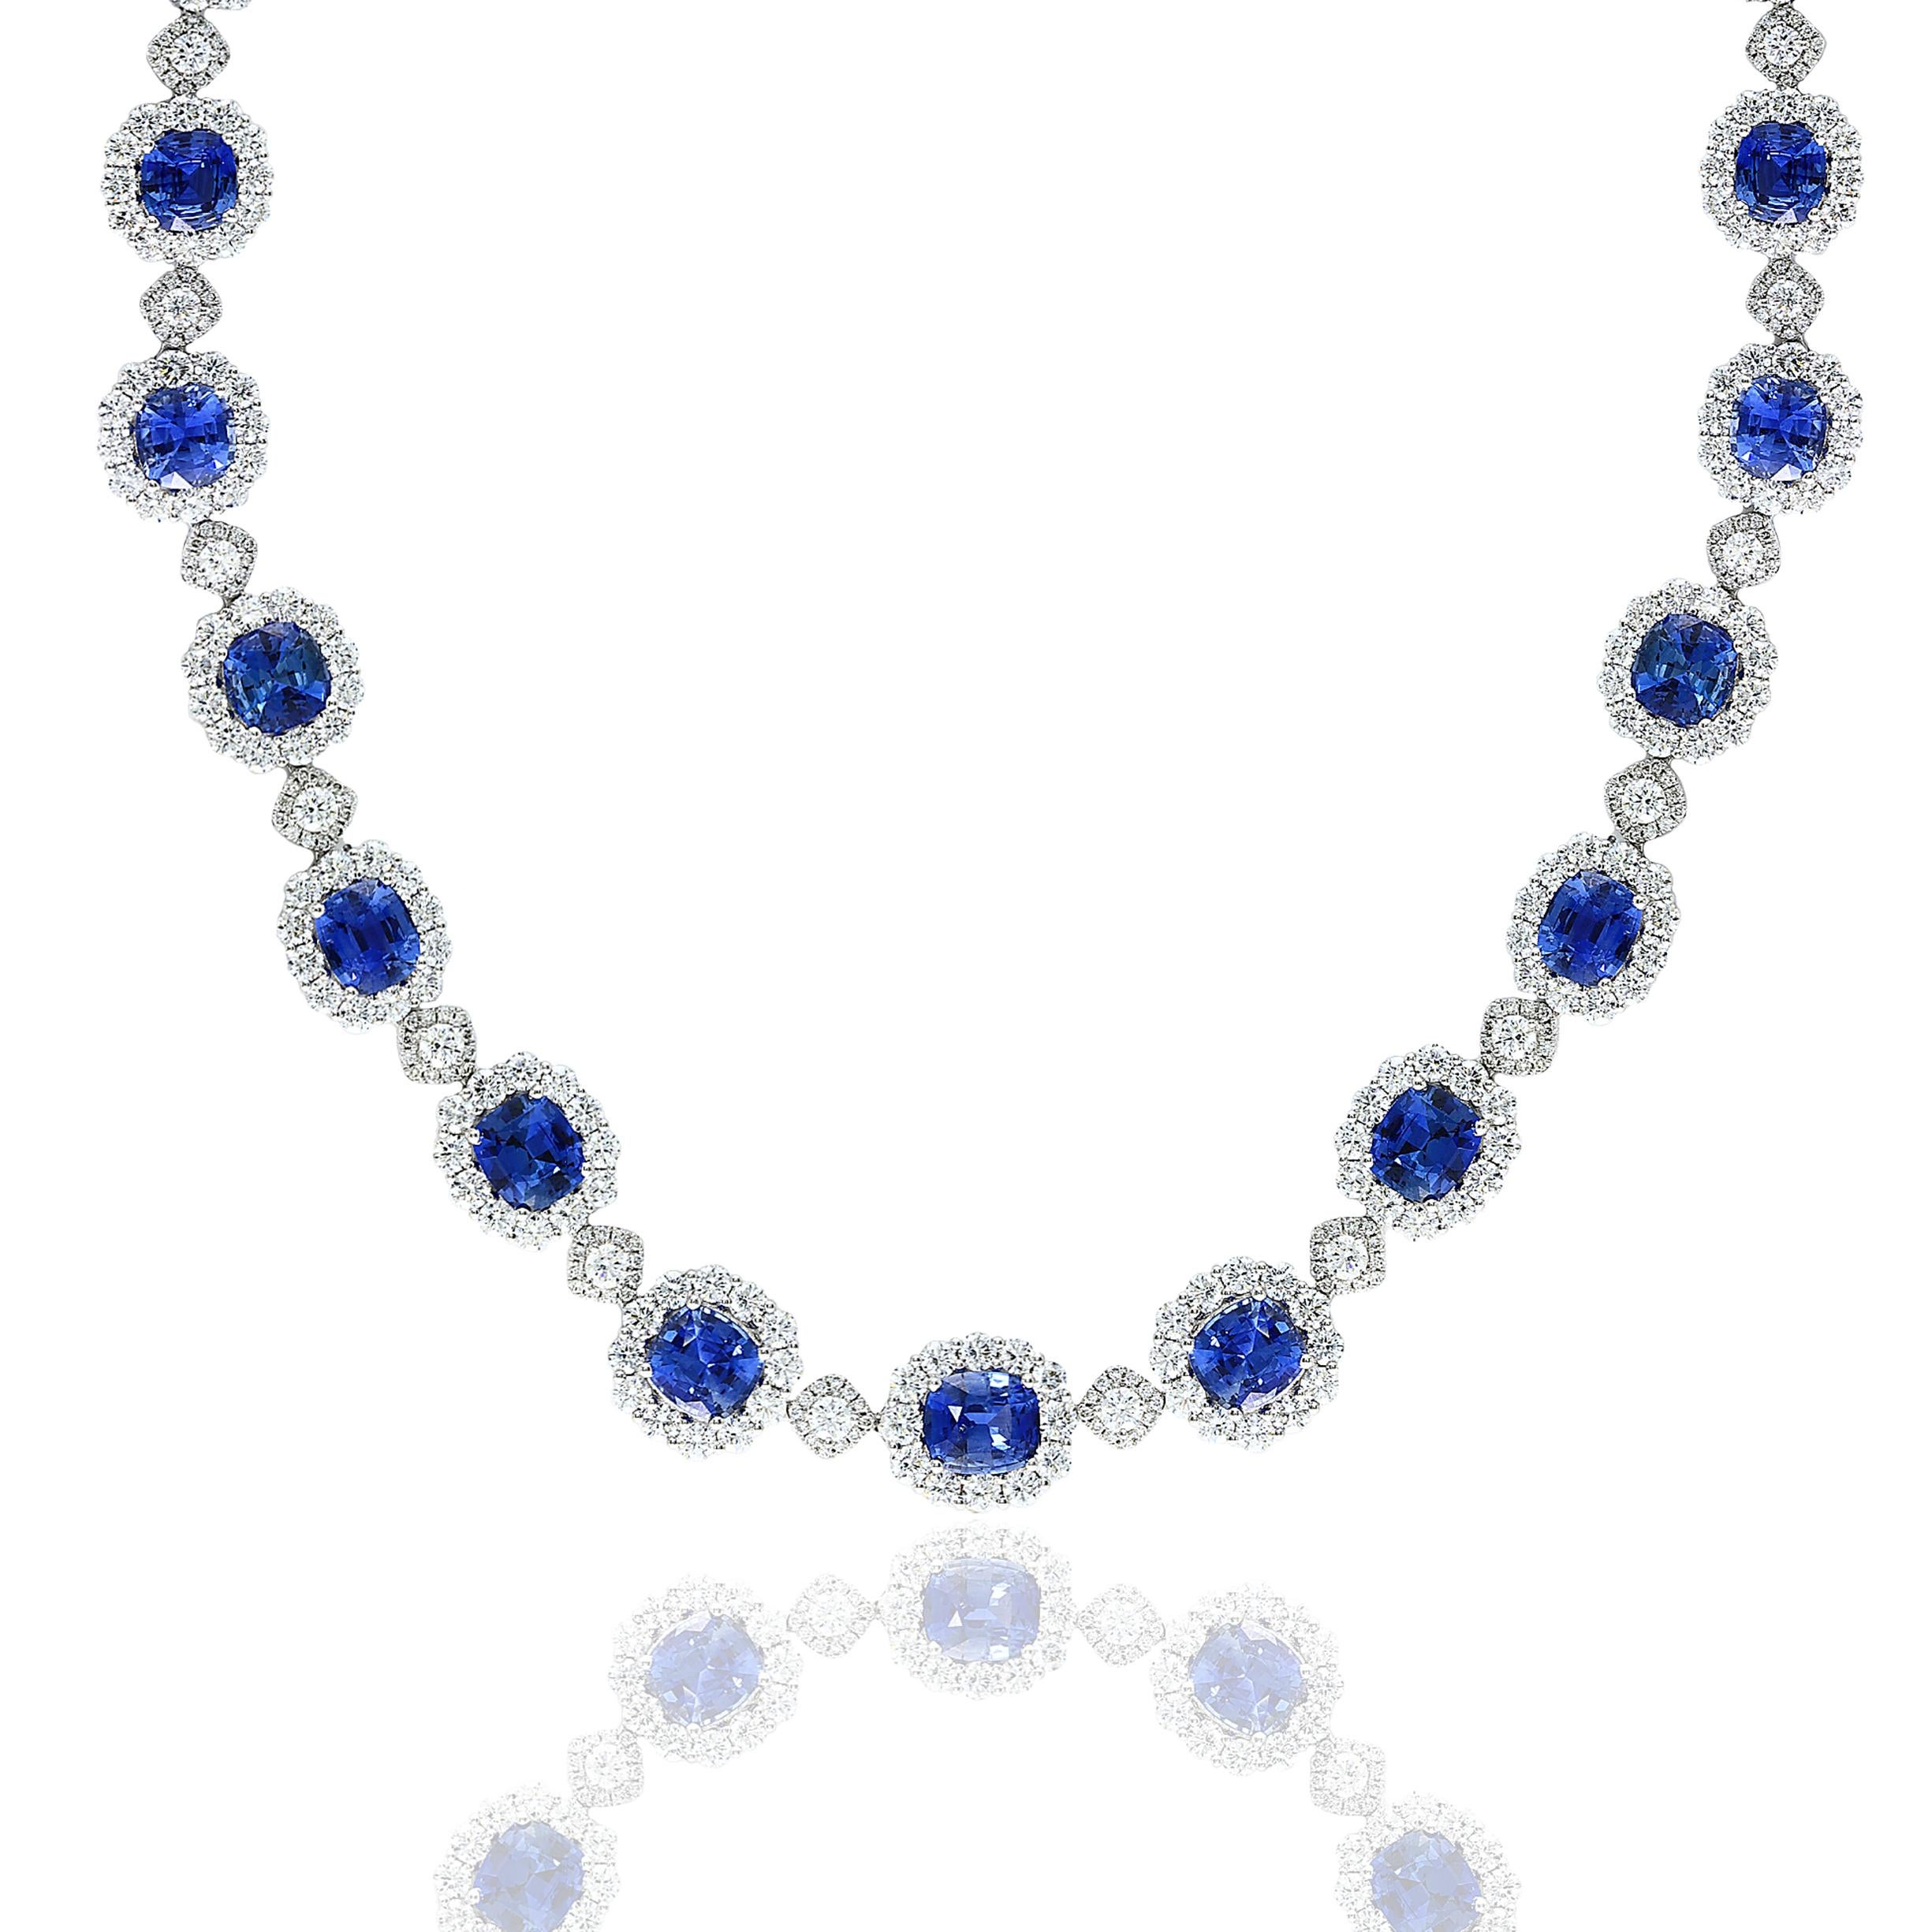 An important and very rare necklace showcasing vibrant and color-rich cushion-cut blue sapphires, set in a beautiful design. An intricately-designed necklace accented with brilliant cut diamonds in a 18K white gold mounting. 23 Blue Sapphires weigh